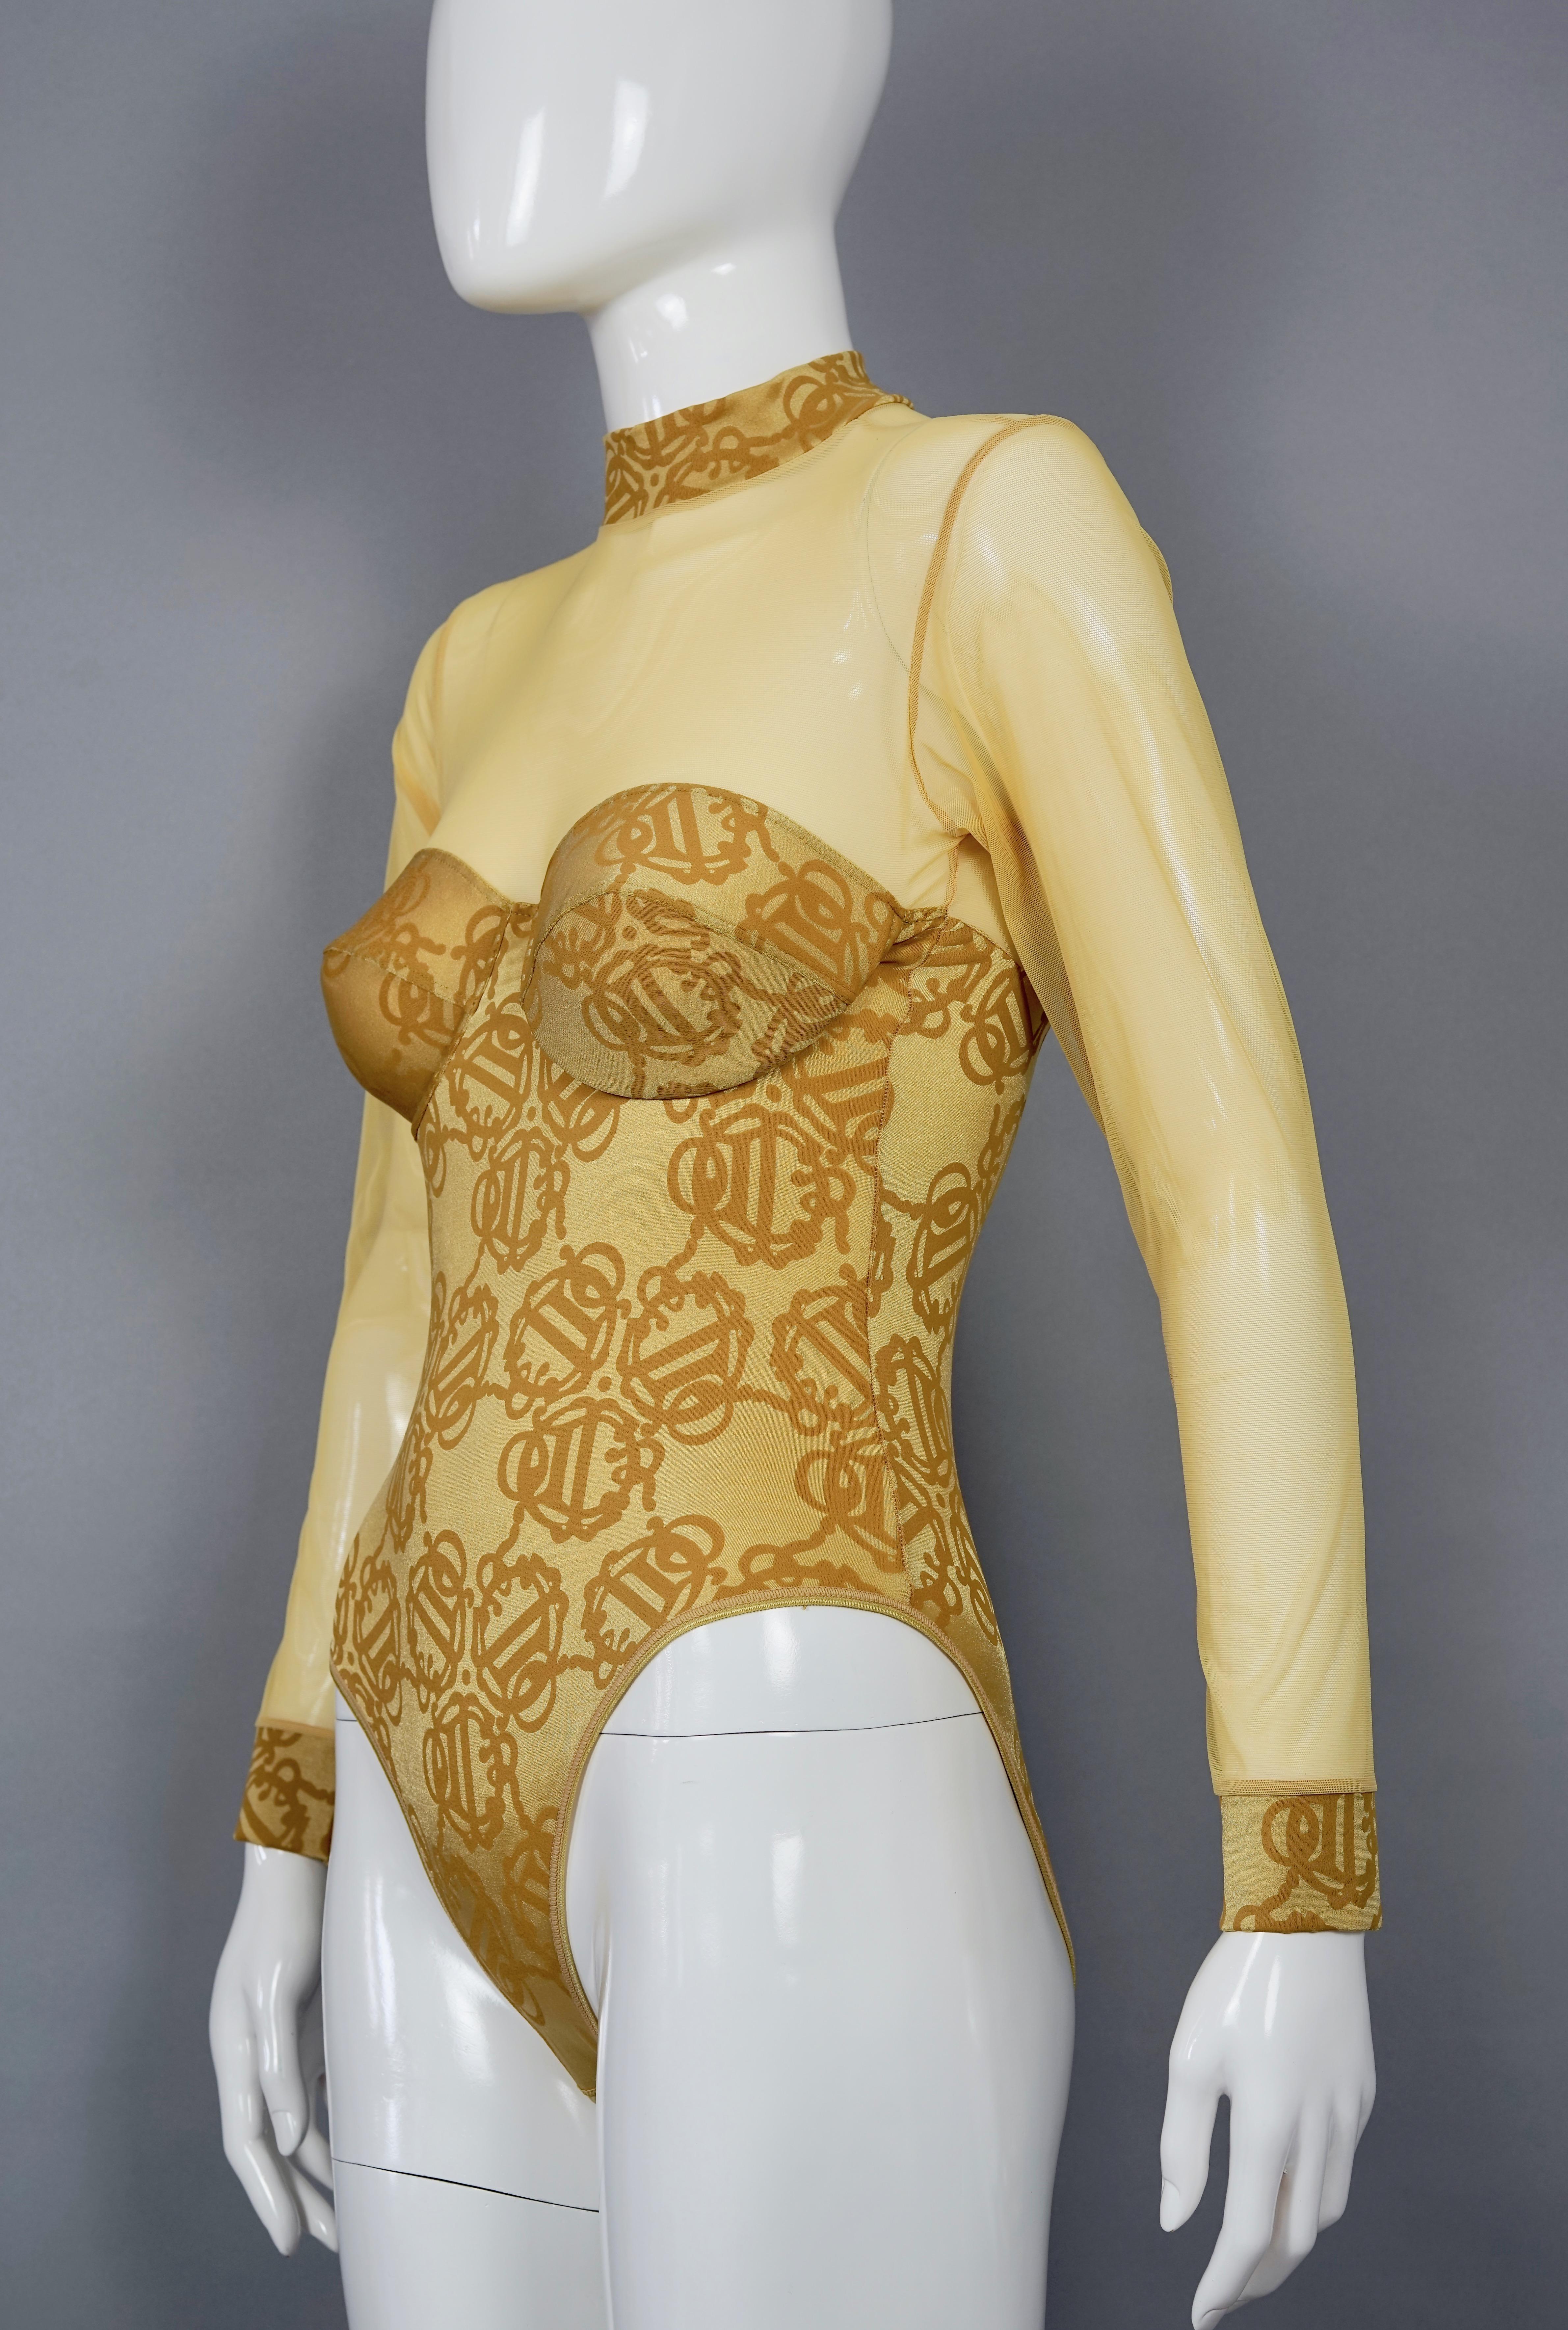 Vintage CHRISTIAN DIOR Insignia Monogram Yellow Bodysuit

Measurements taken laid flat, please double bust, waist and hips:
Shoulder: 13.77 inches (35 cm) without stretching it
Sleeves: 21.65 inches (55 cm) without stretching it
Bust: 13.38 inches